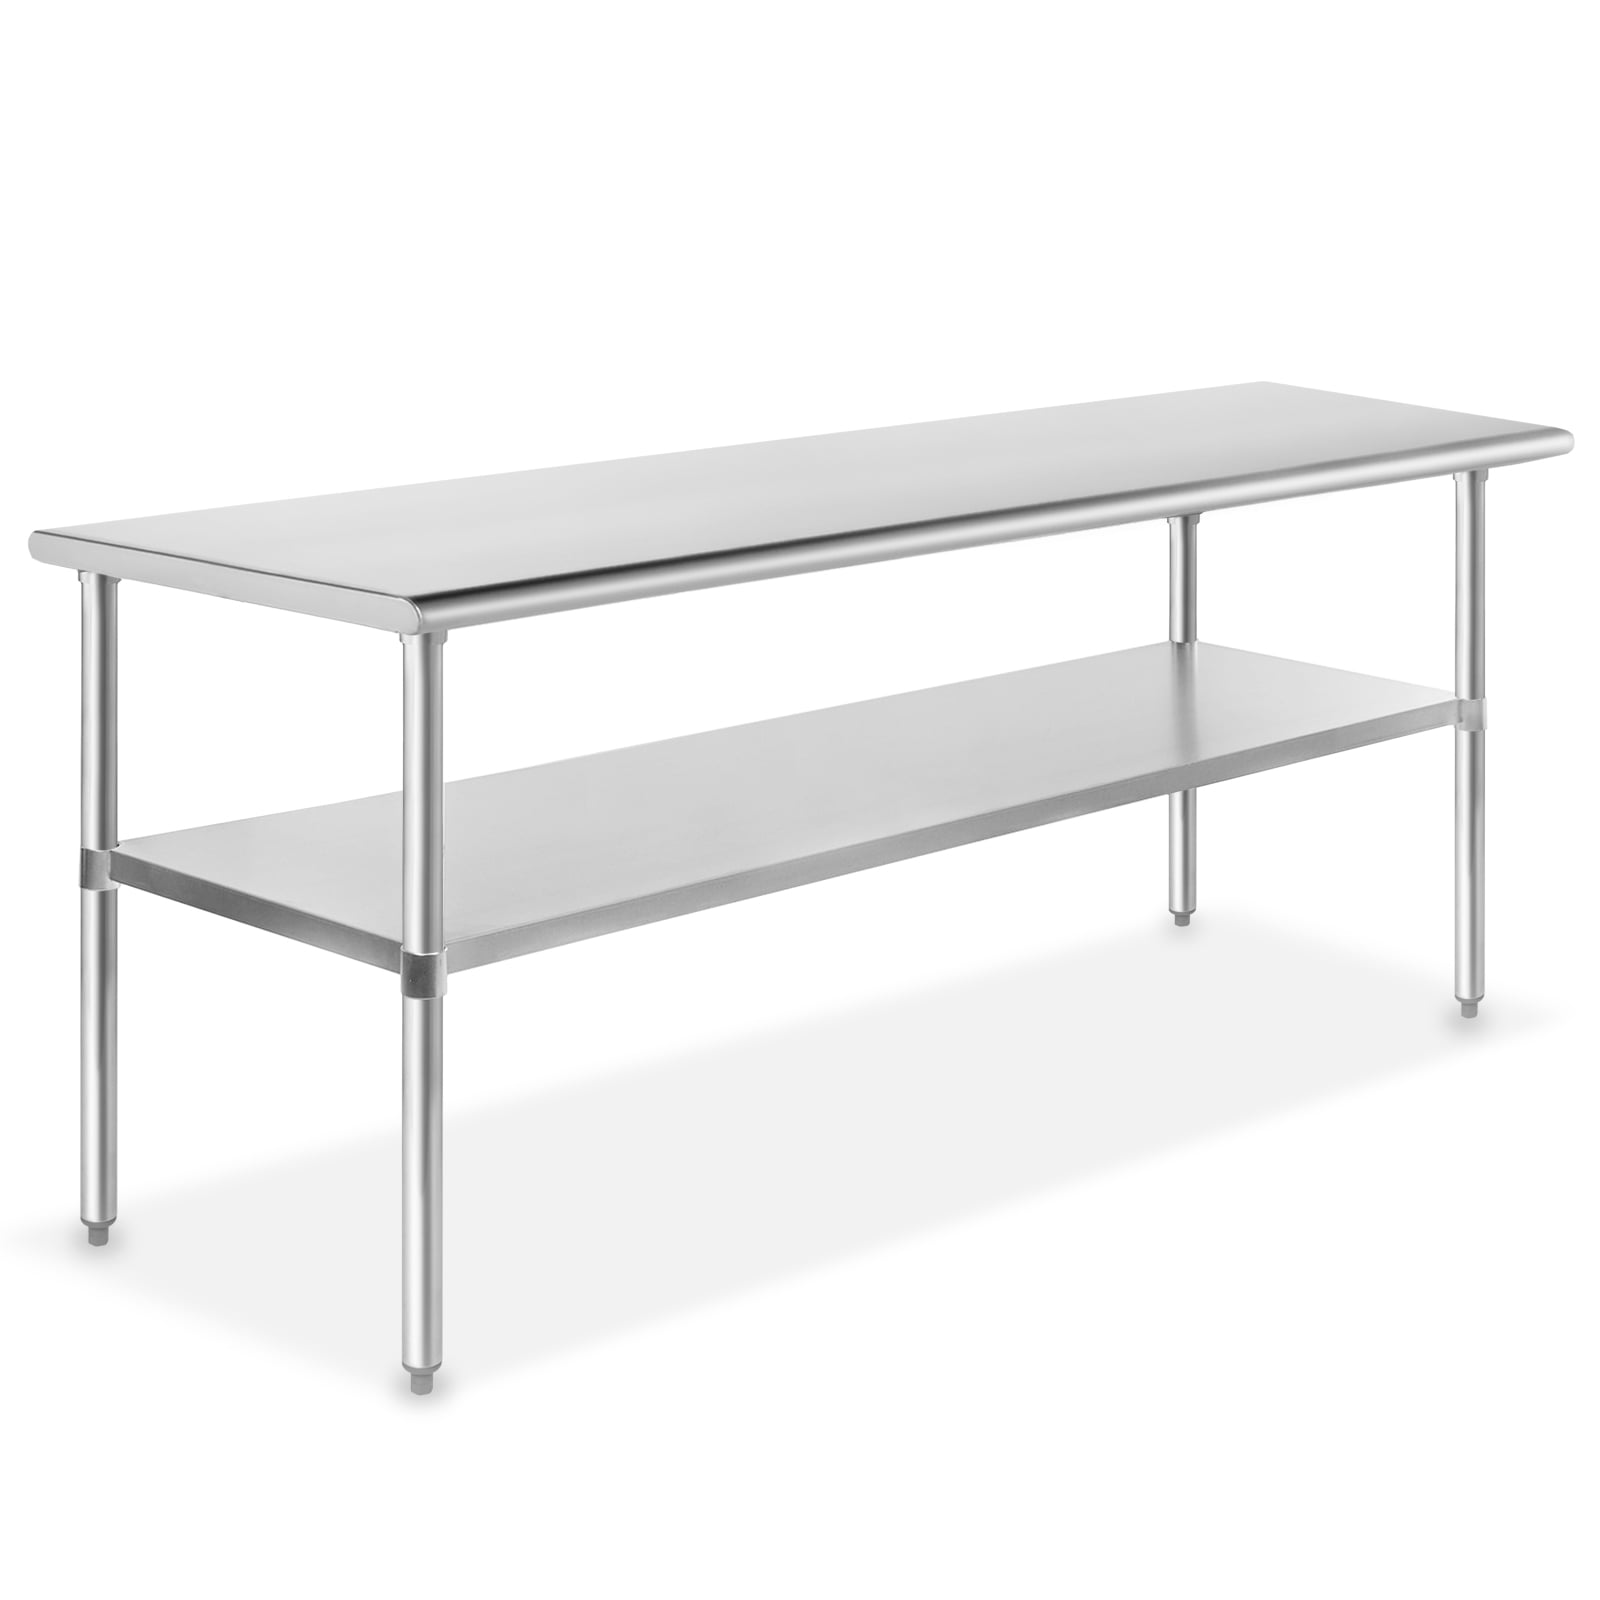 GRIDMANN NSF Stainless Steel Commercial Kitchen Prep & Work Table 60